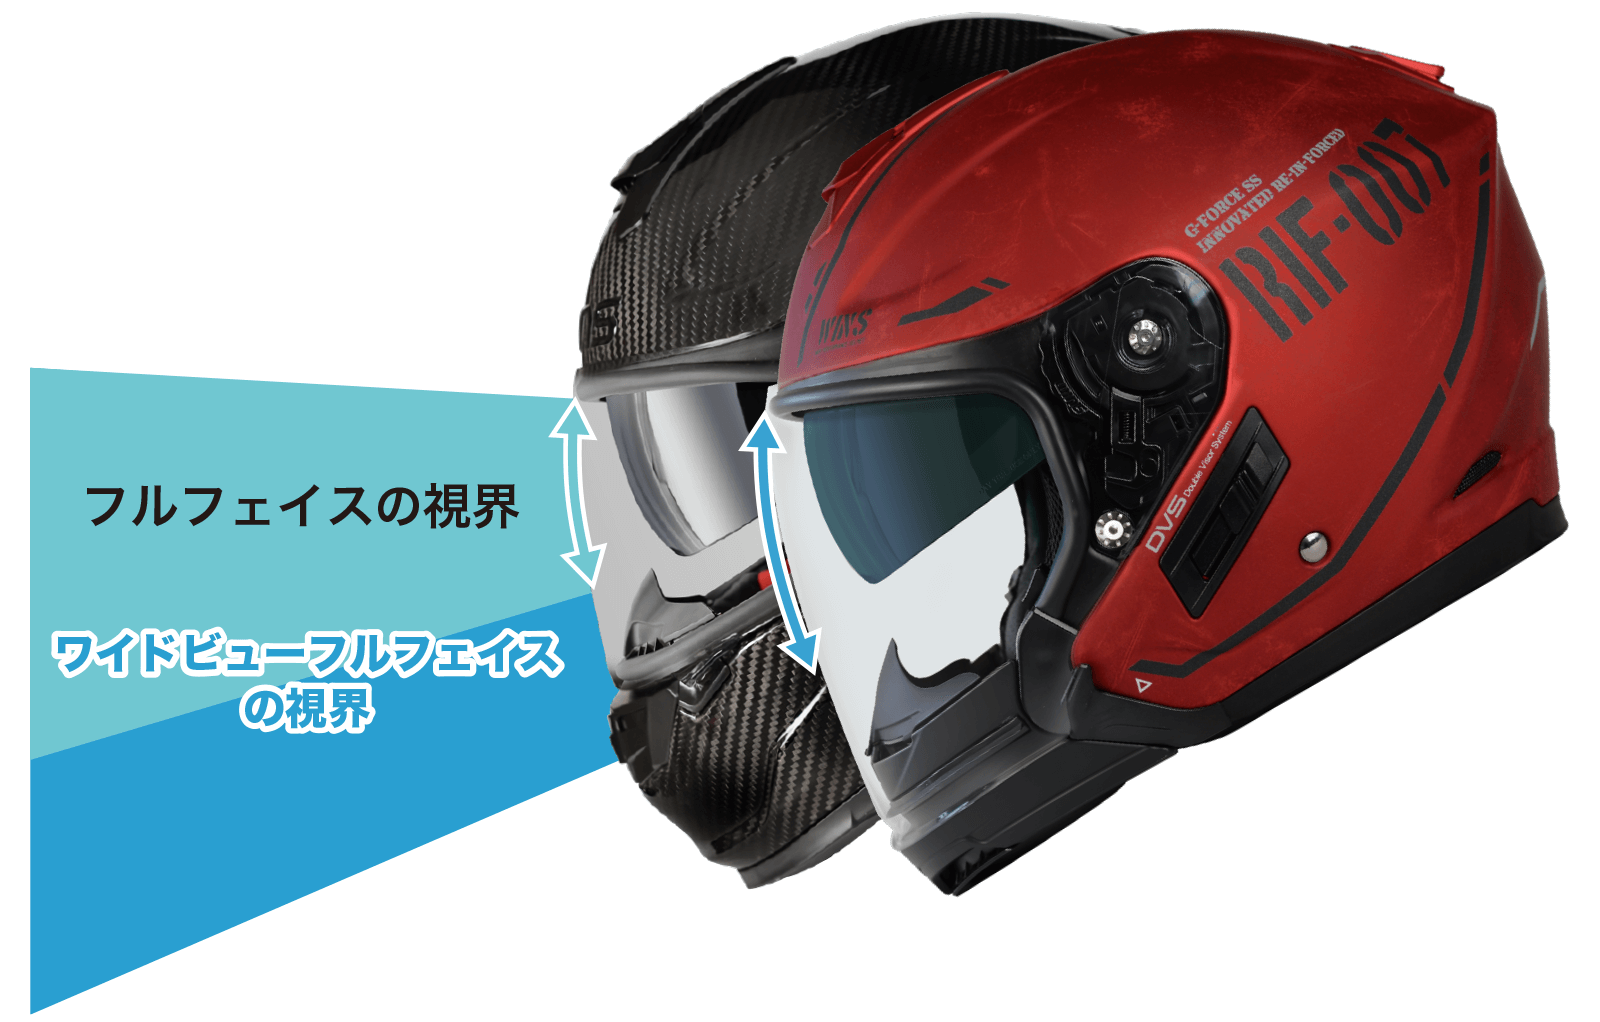 WINS ヘルメット G-FORCE SS JET STEALTH